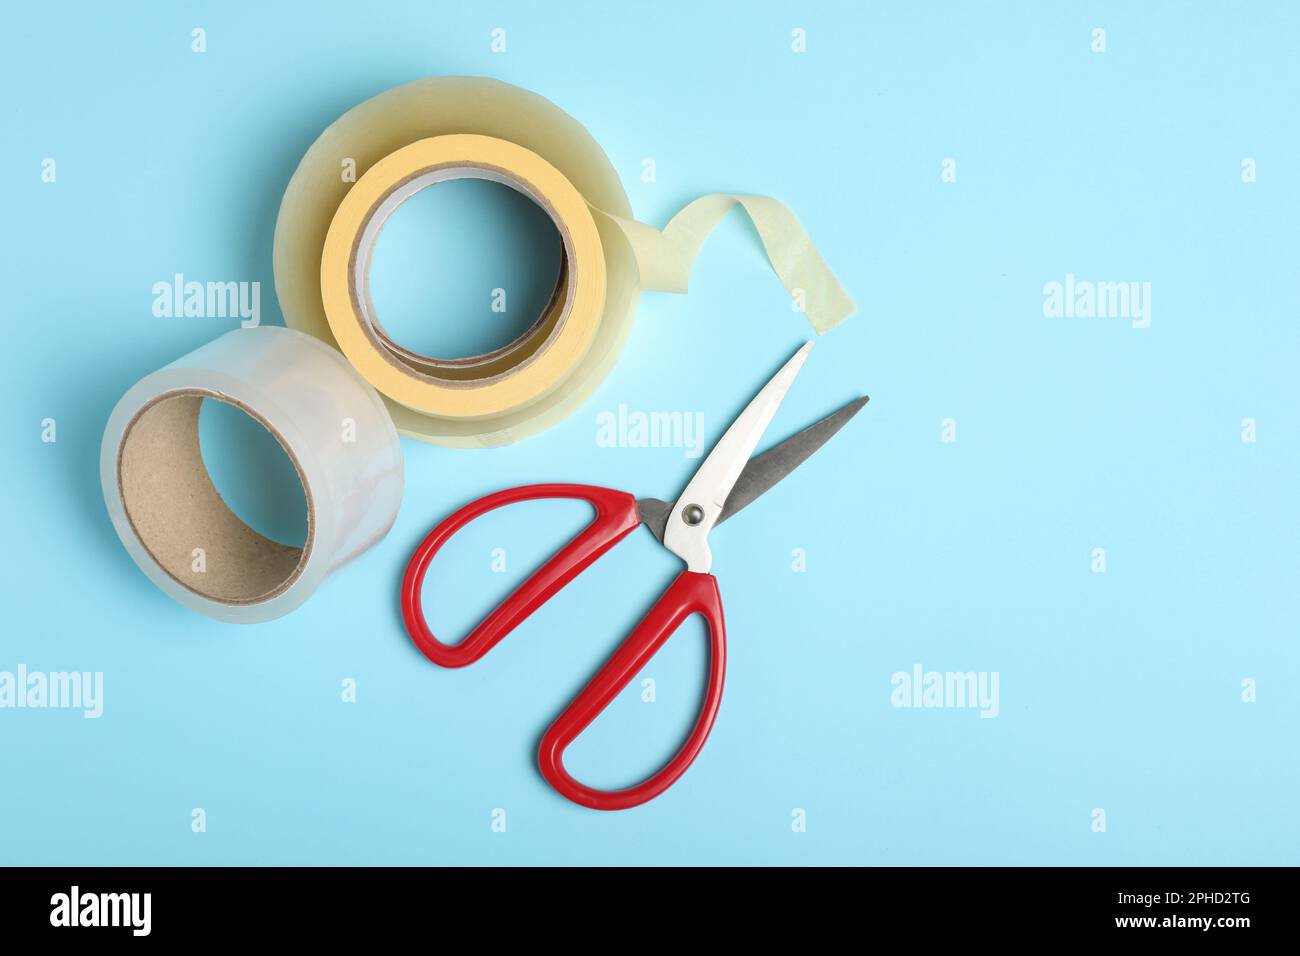 https://c8.alamy.com/comp/2PHD2TG/rolls-of-adhesive-tape-and-scissors-on-light-blue-background-flat-lay-space-for-text-2PHD2TG.jpg